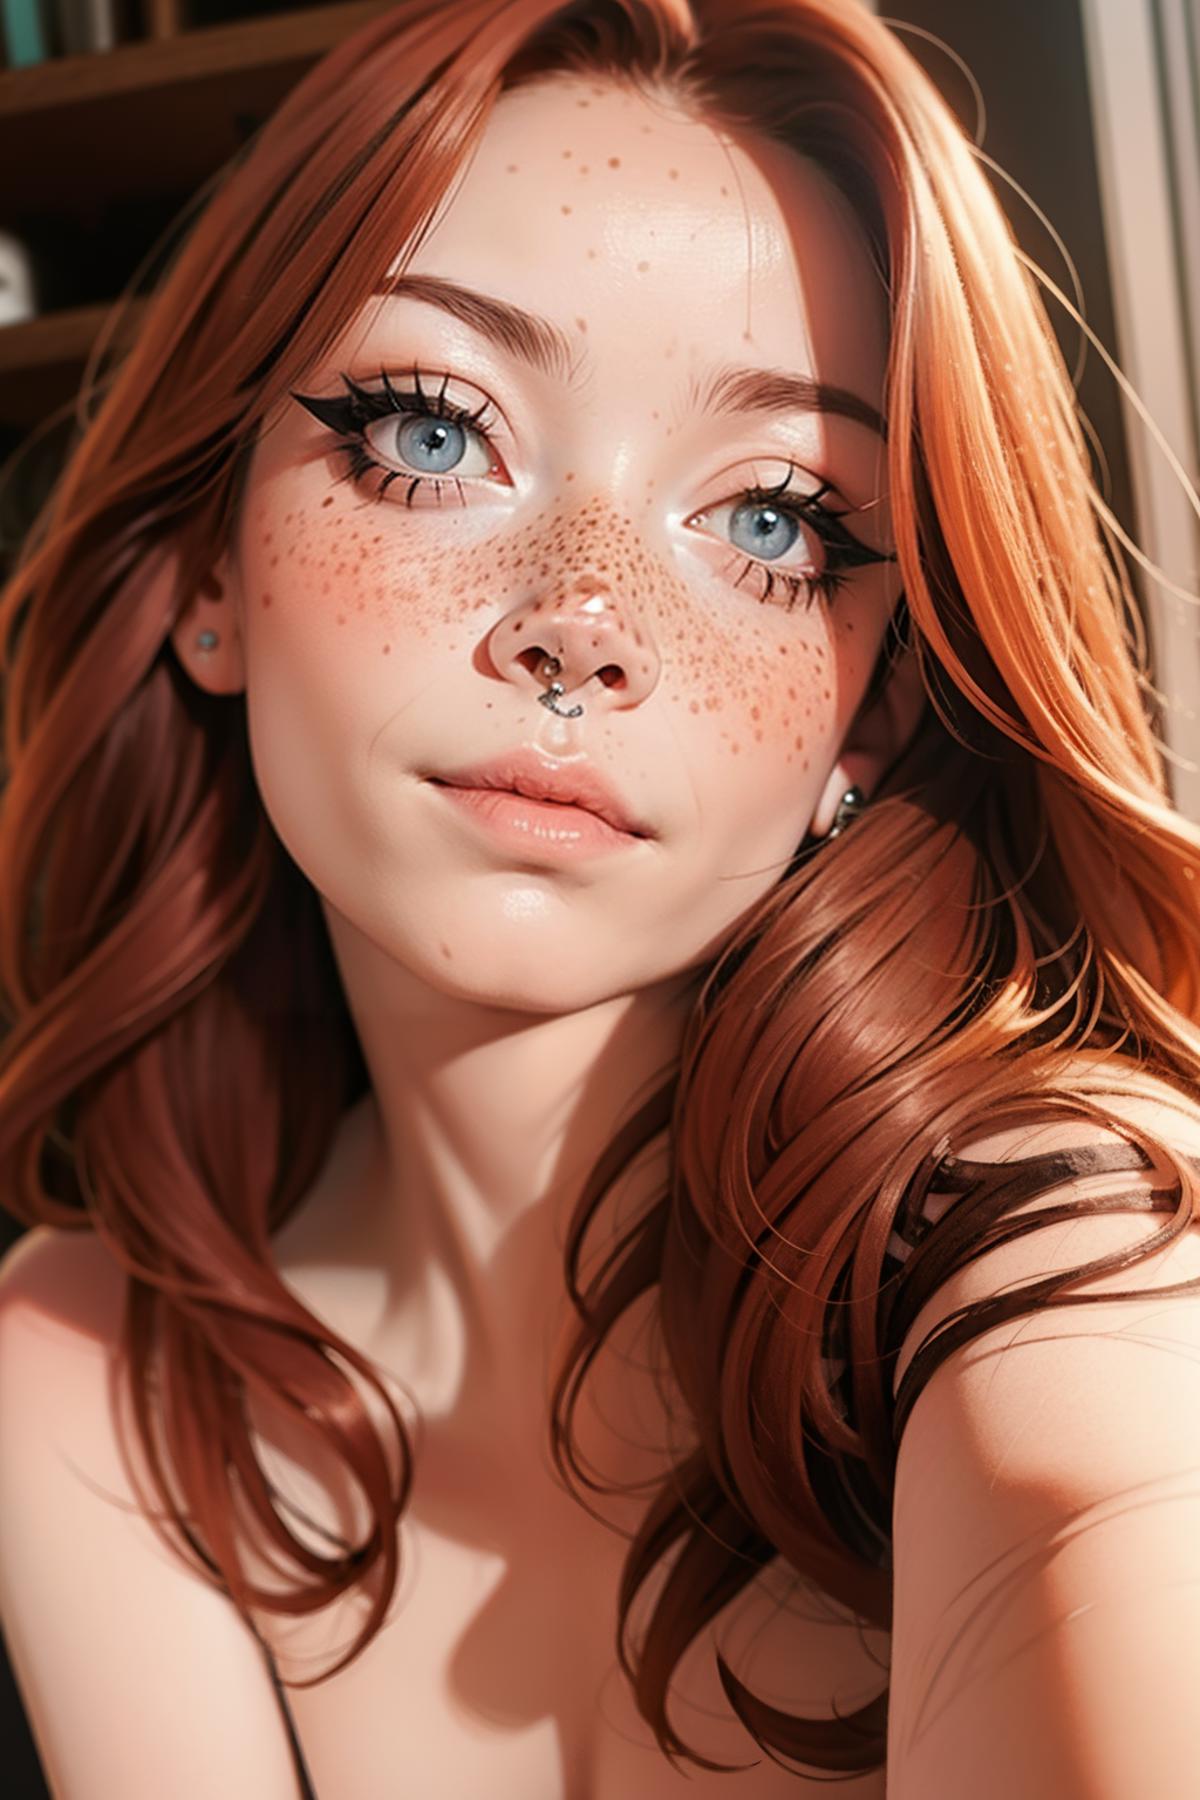 A Redhead Woman with Blue Eyes and a Nose Ring Taking a Selfie